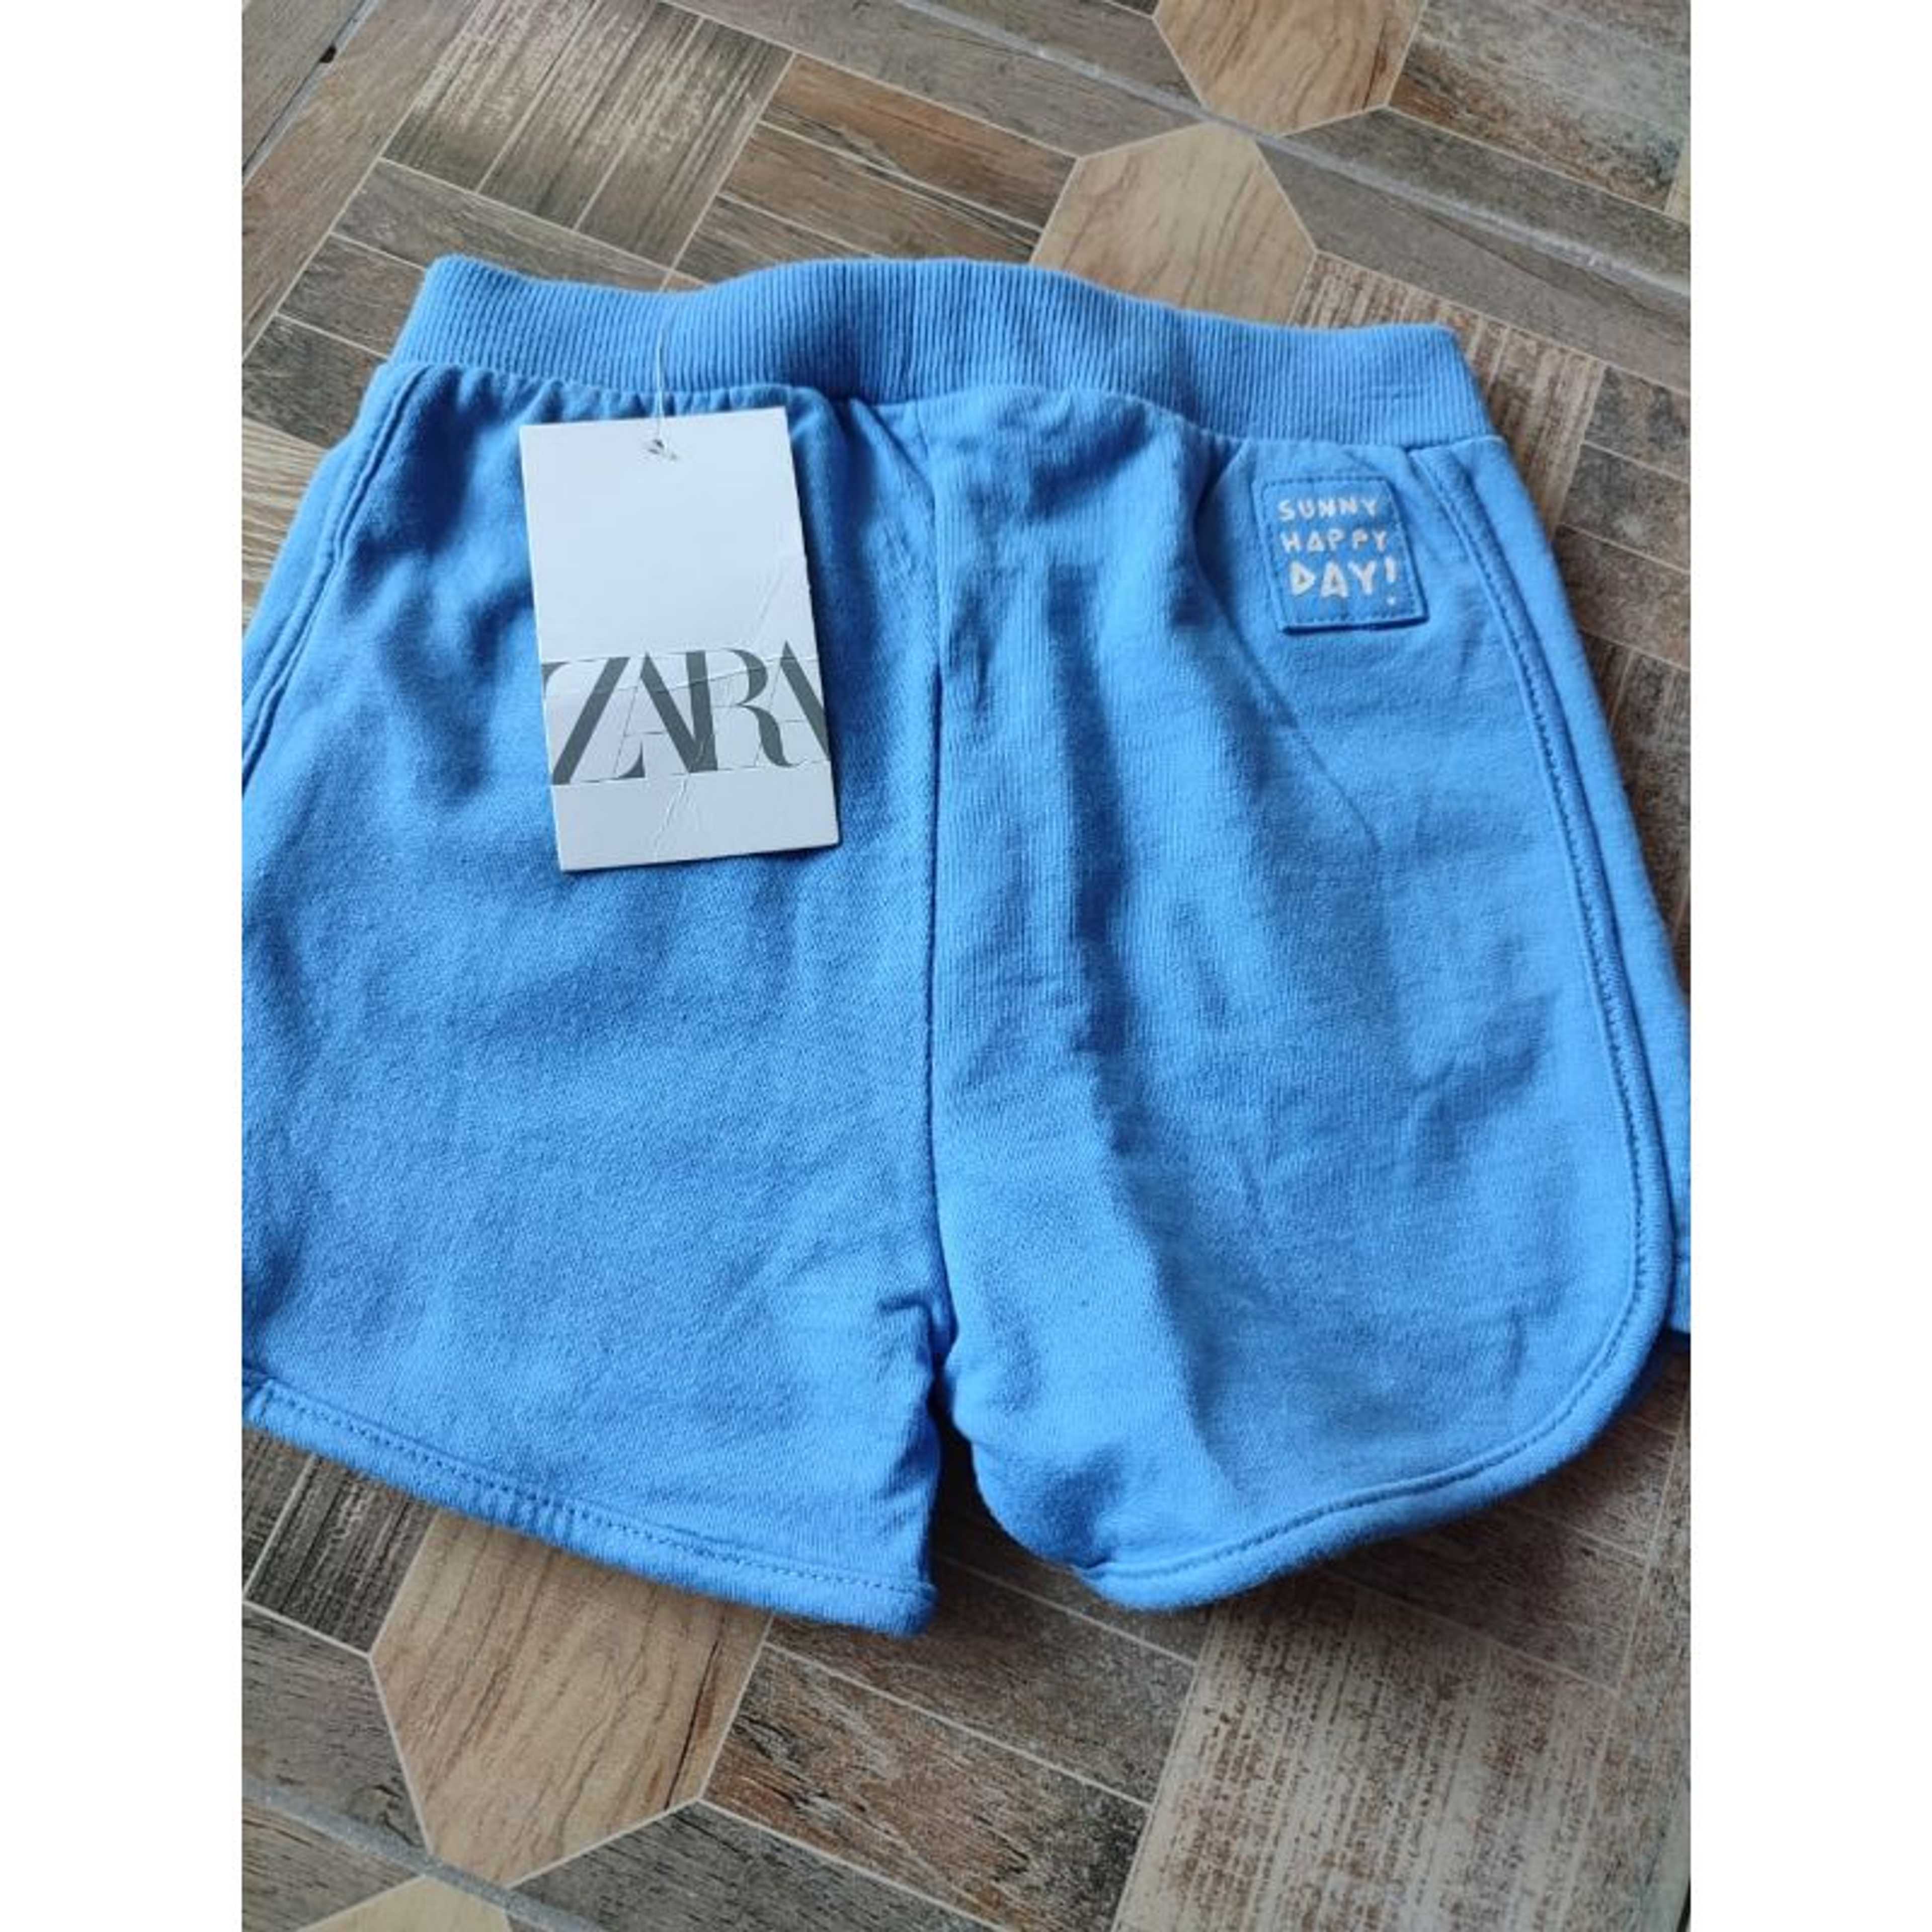 Boys shorts in Blue color